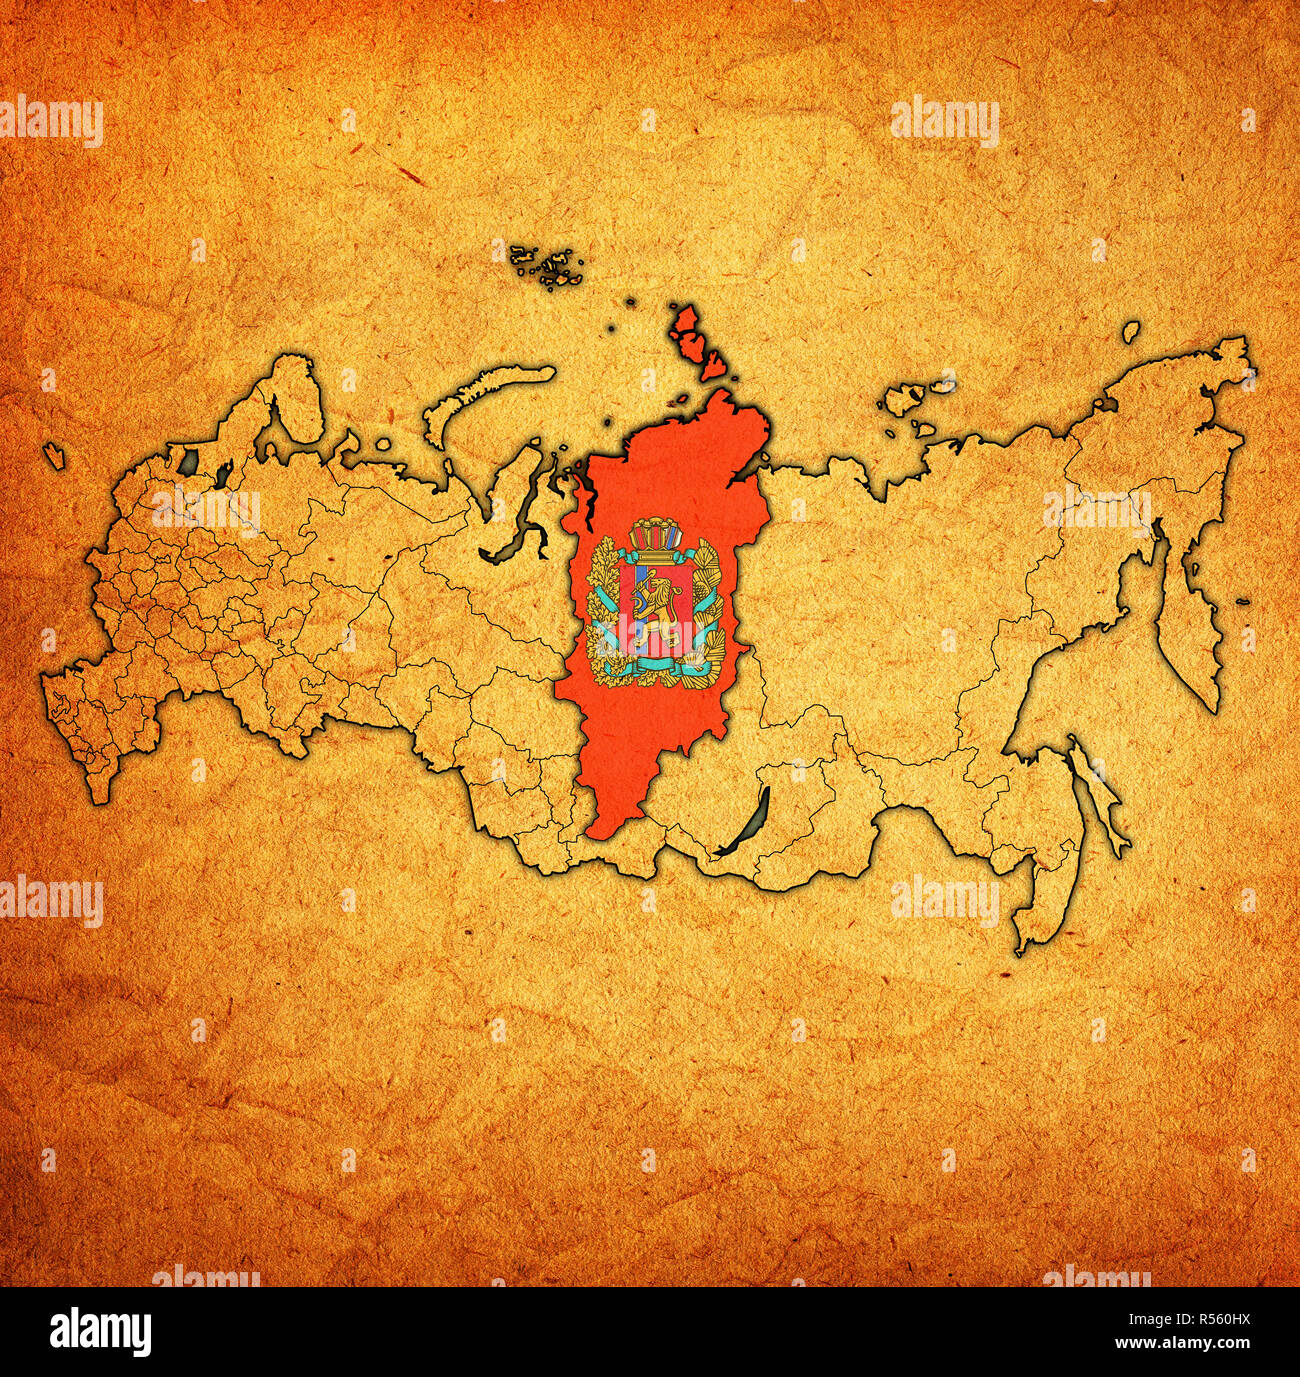 emblem of Krasnoyarsk krai on map with administrative divisions and borders of russia Stock Photo